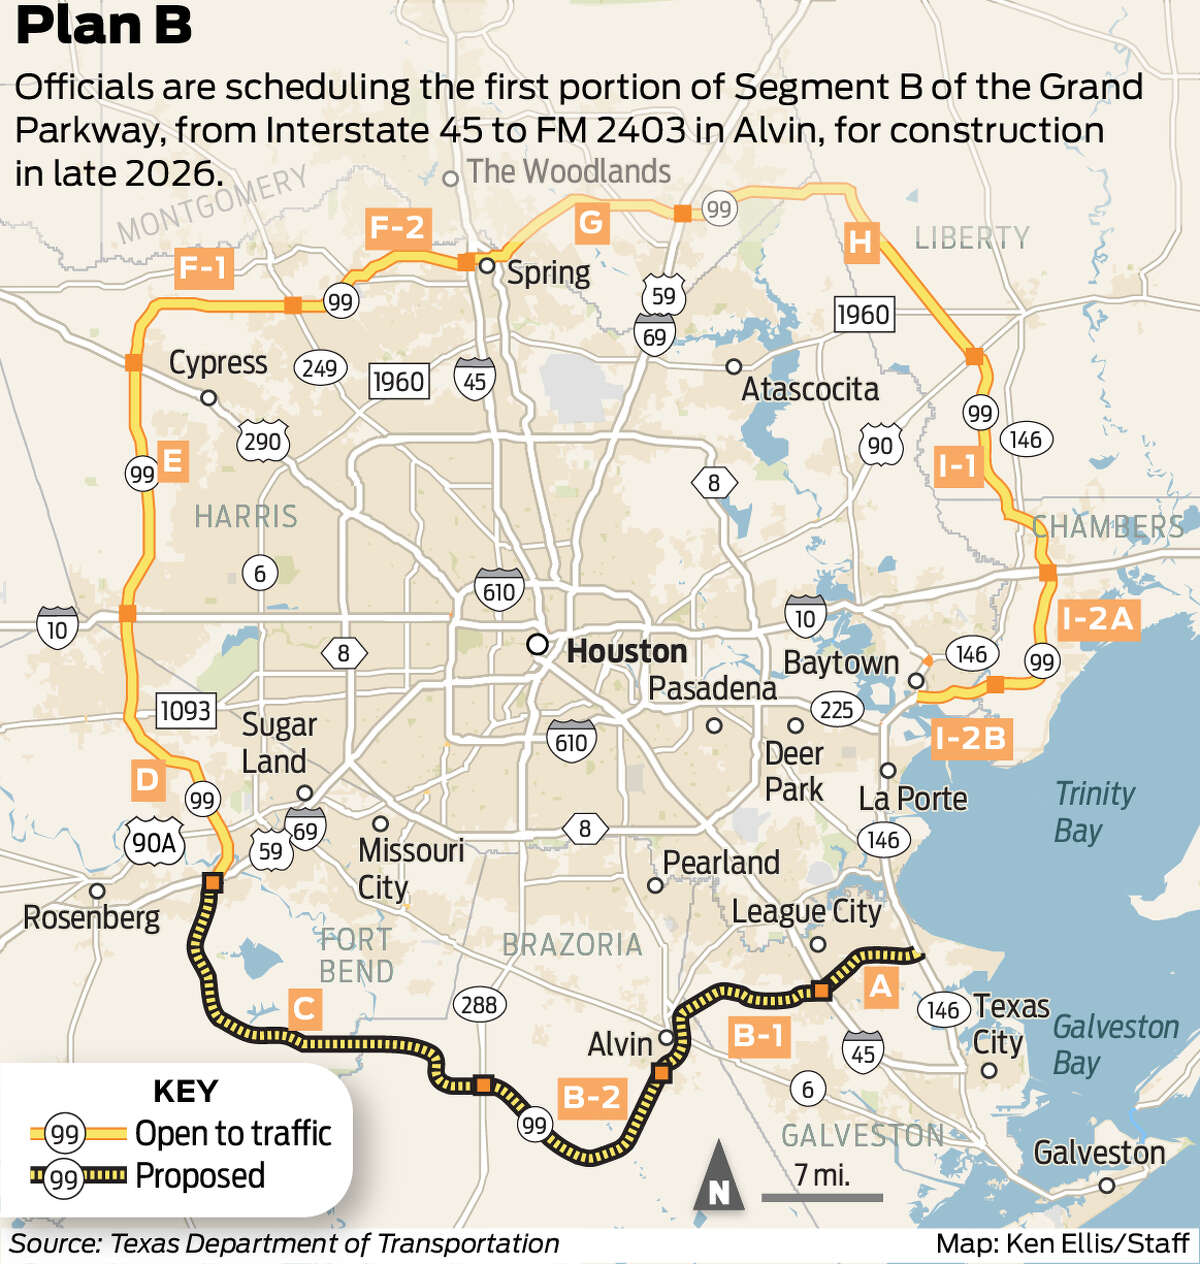 I-45 to Alvin segment of Grand Parkway set for late 2026 start